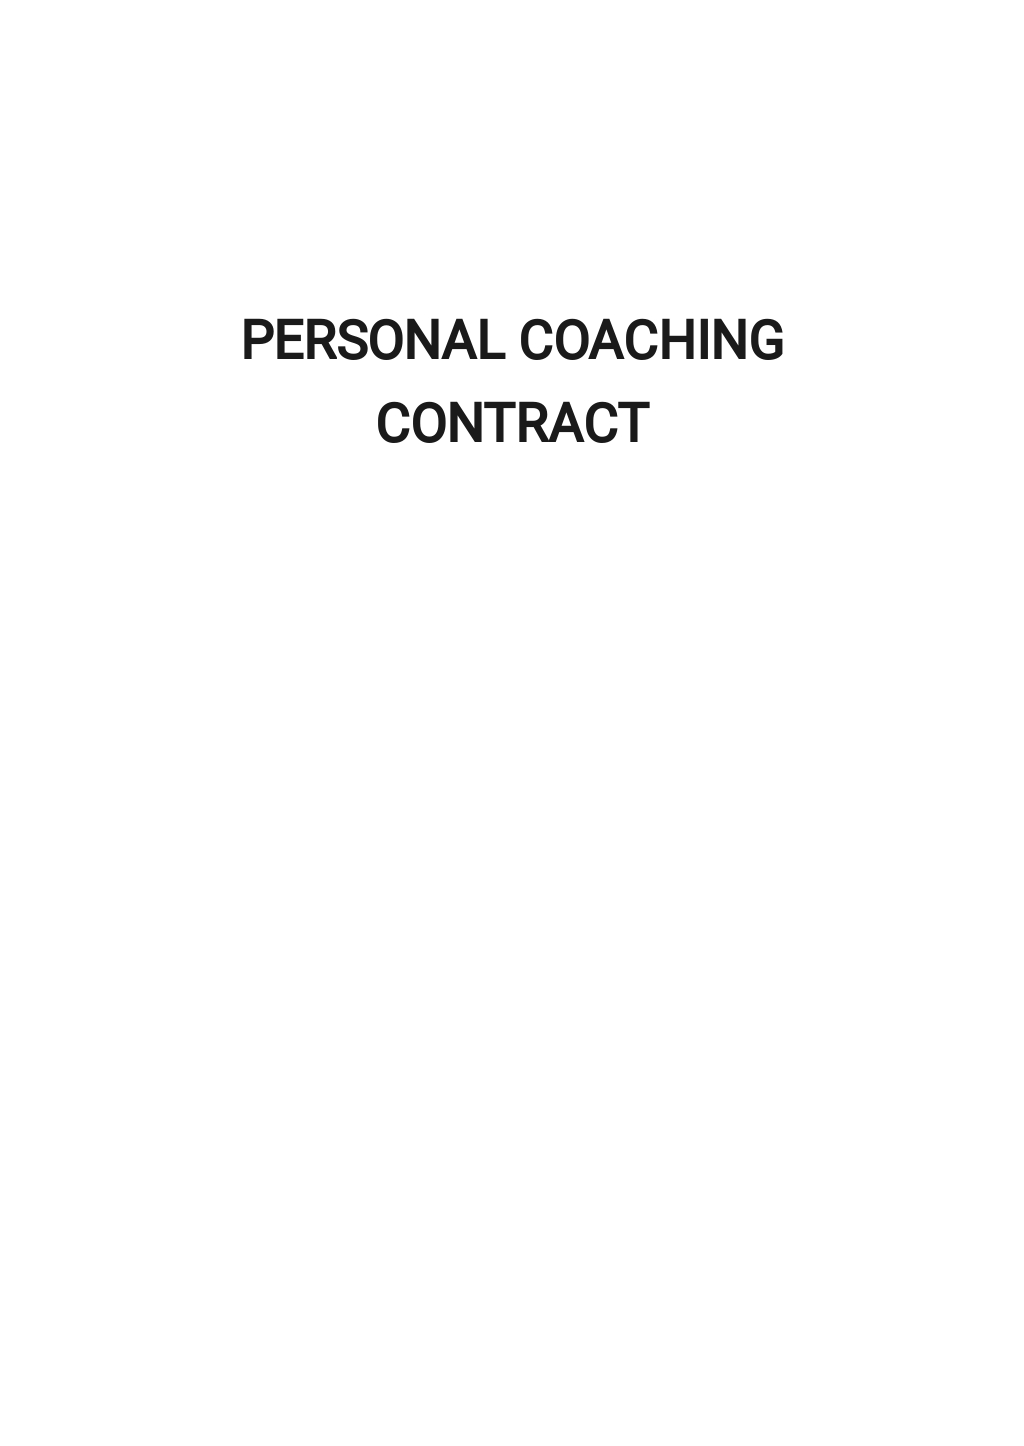 Free Personal Coaching Contract Template